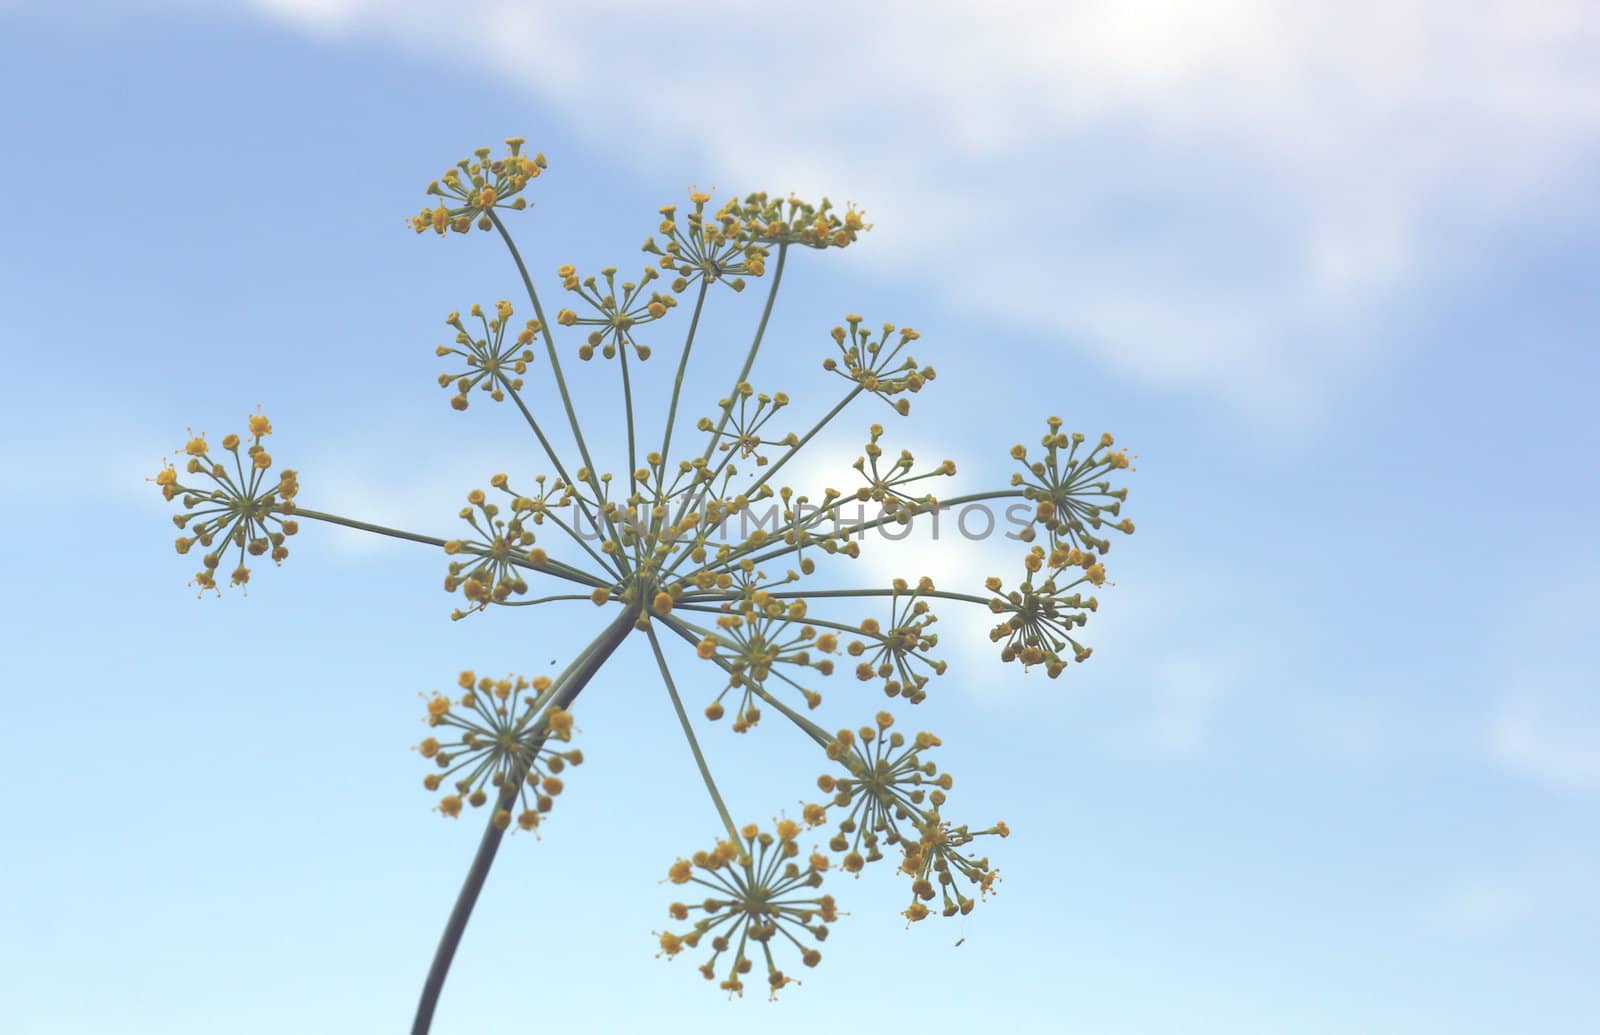 Fennel with blue sky on the background by sergpet